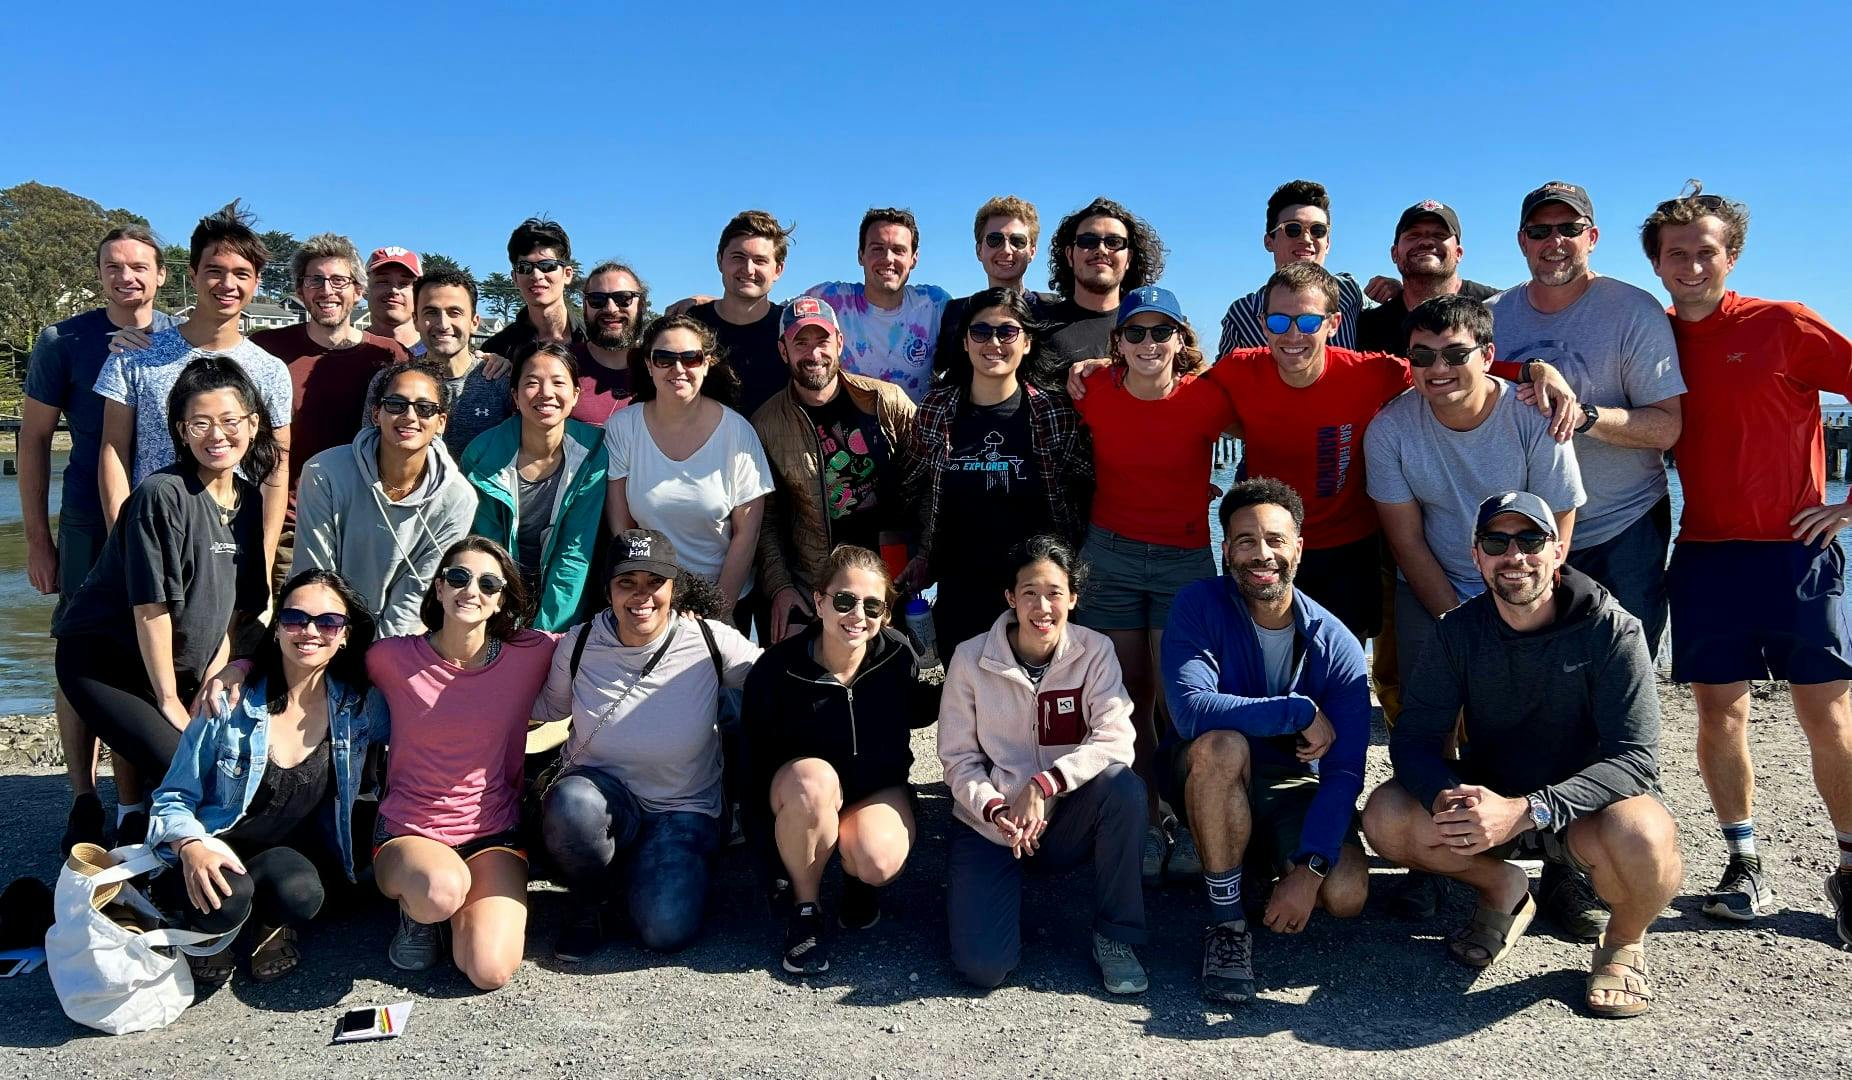 Team photo at our fall 2021 offsite